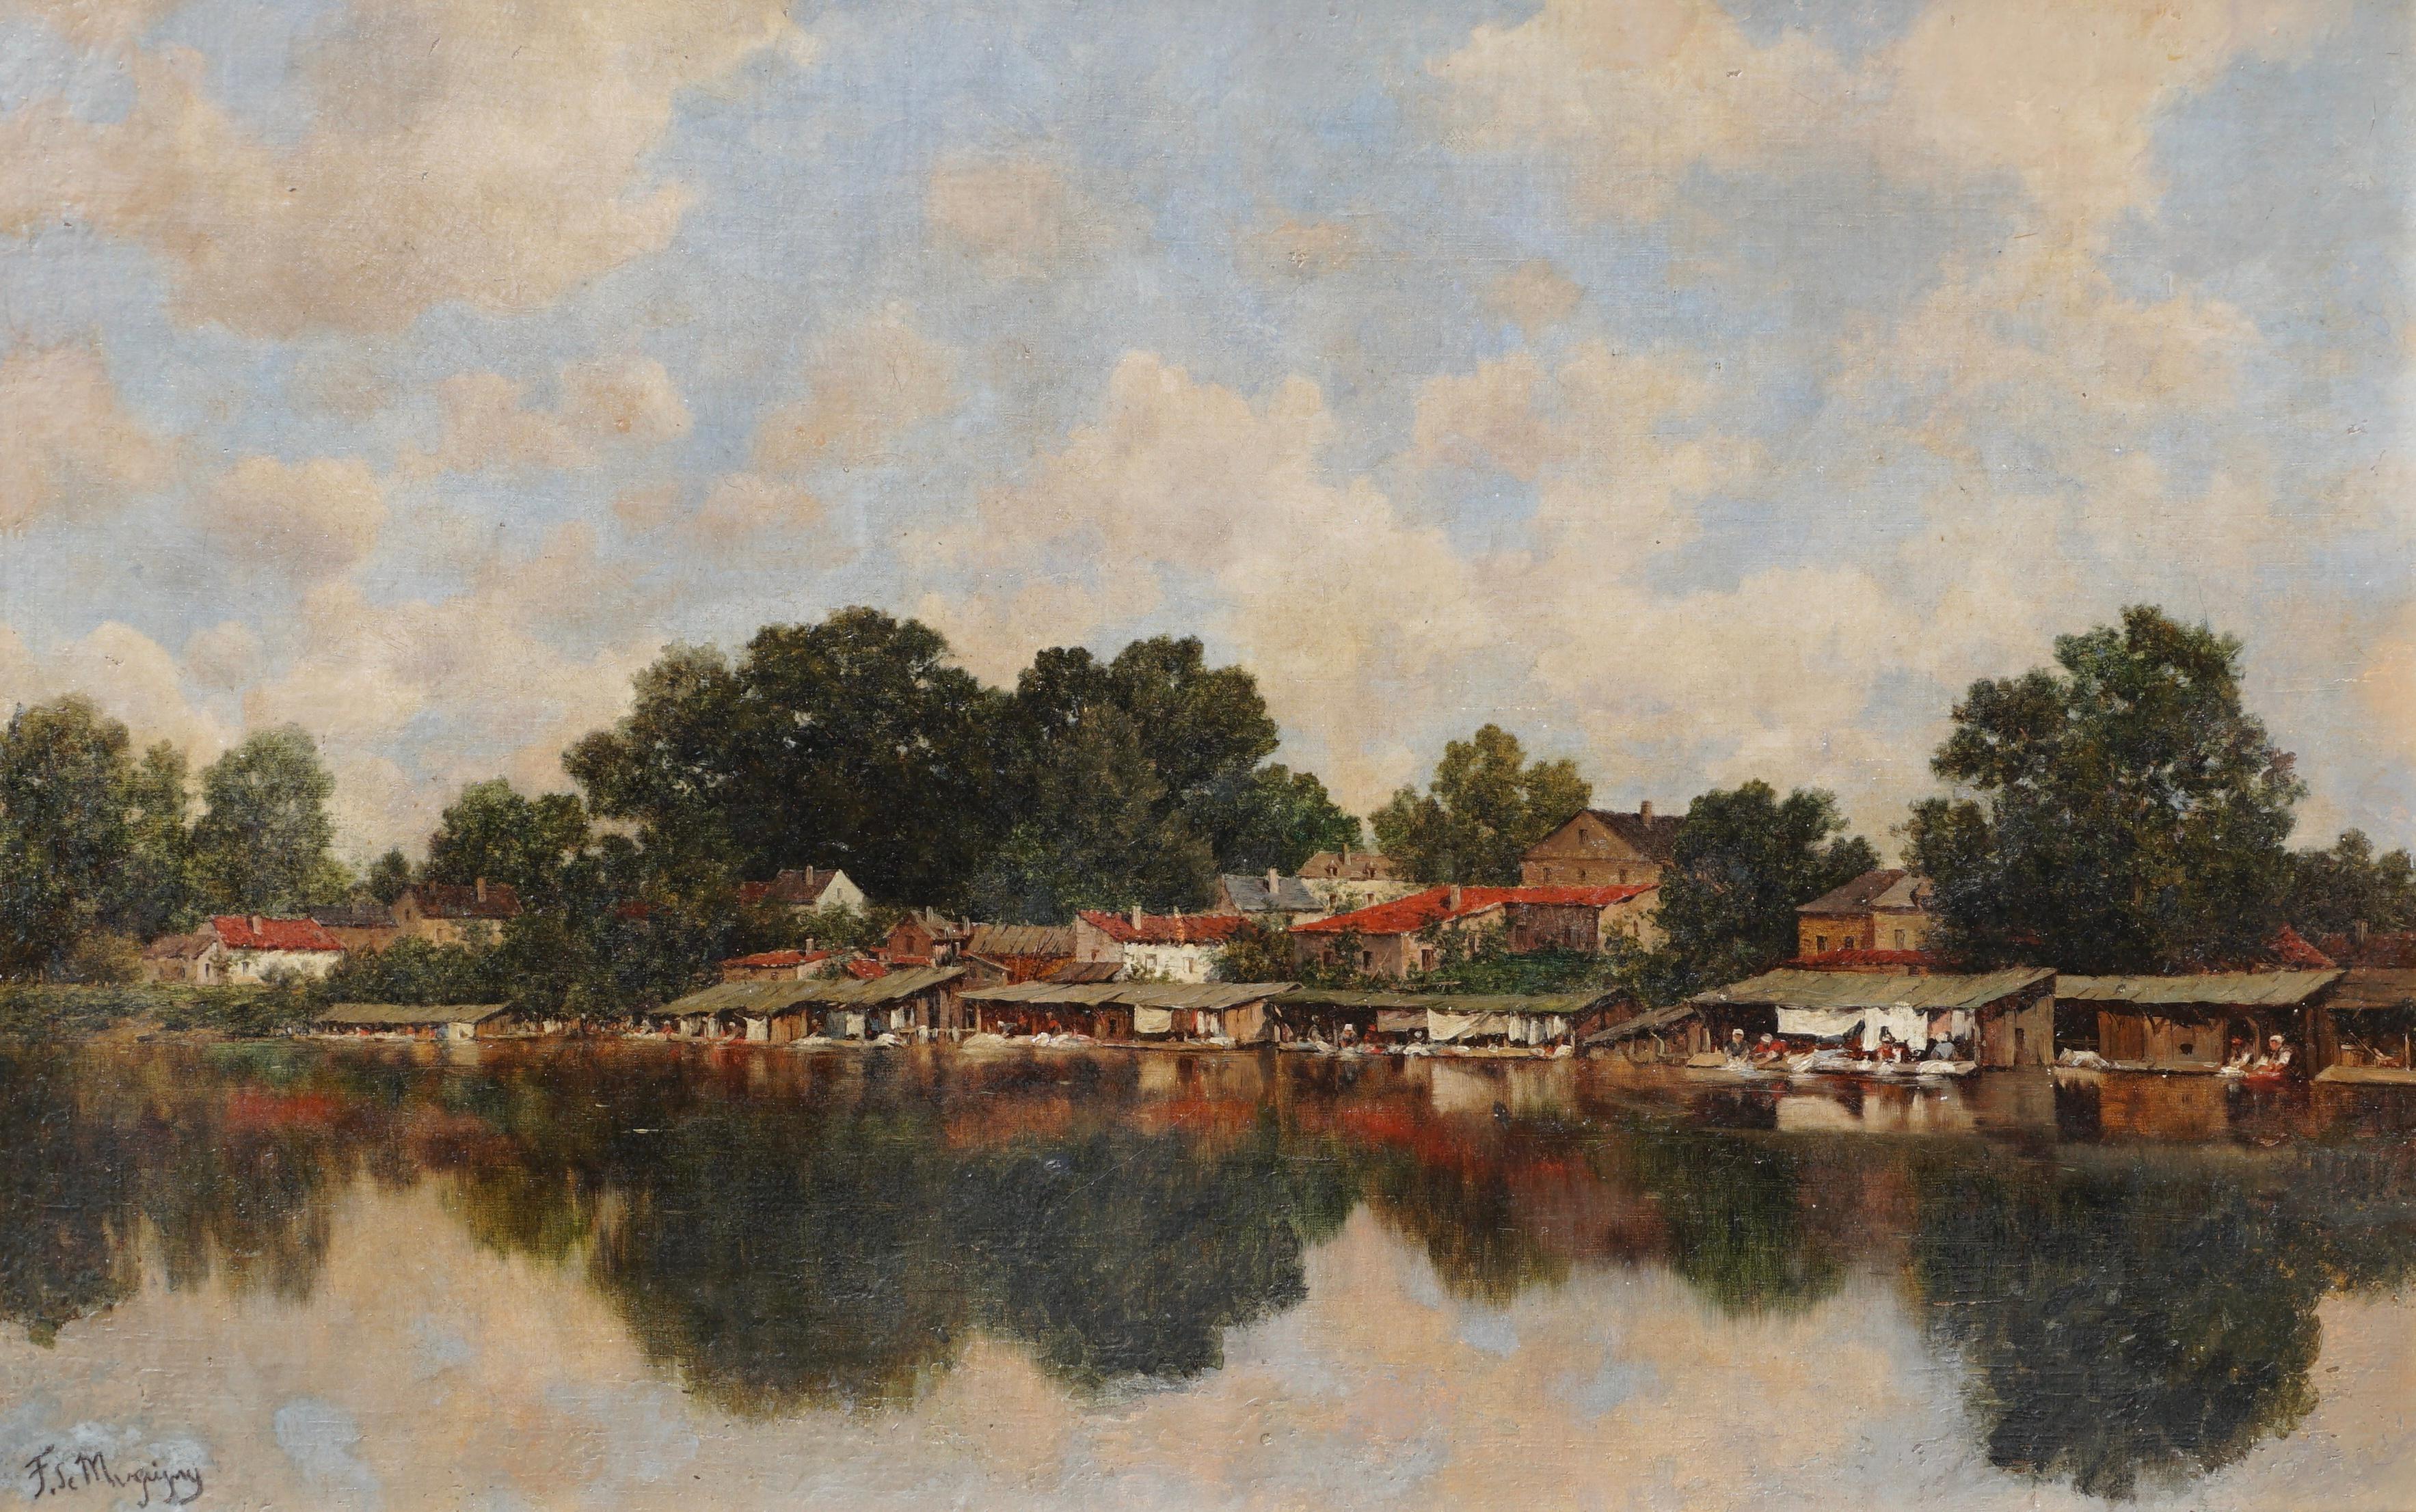 CLAUDE FRANCOIS AUGUSTE MESGRIGNY (French, 1836-1884)
A Rivertown with Laundry Services. A beautiful day on the river with laundresses au bord du rivière with their town and trees overhead reflecting in the waters. Circa 1880 Impressionist